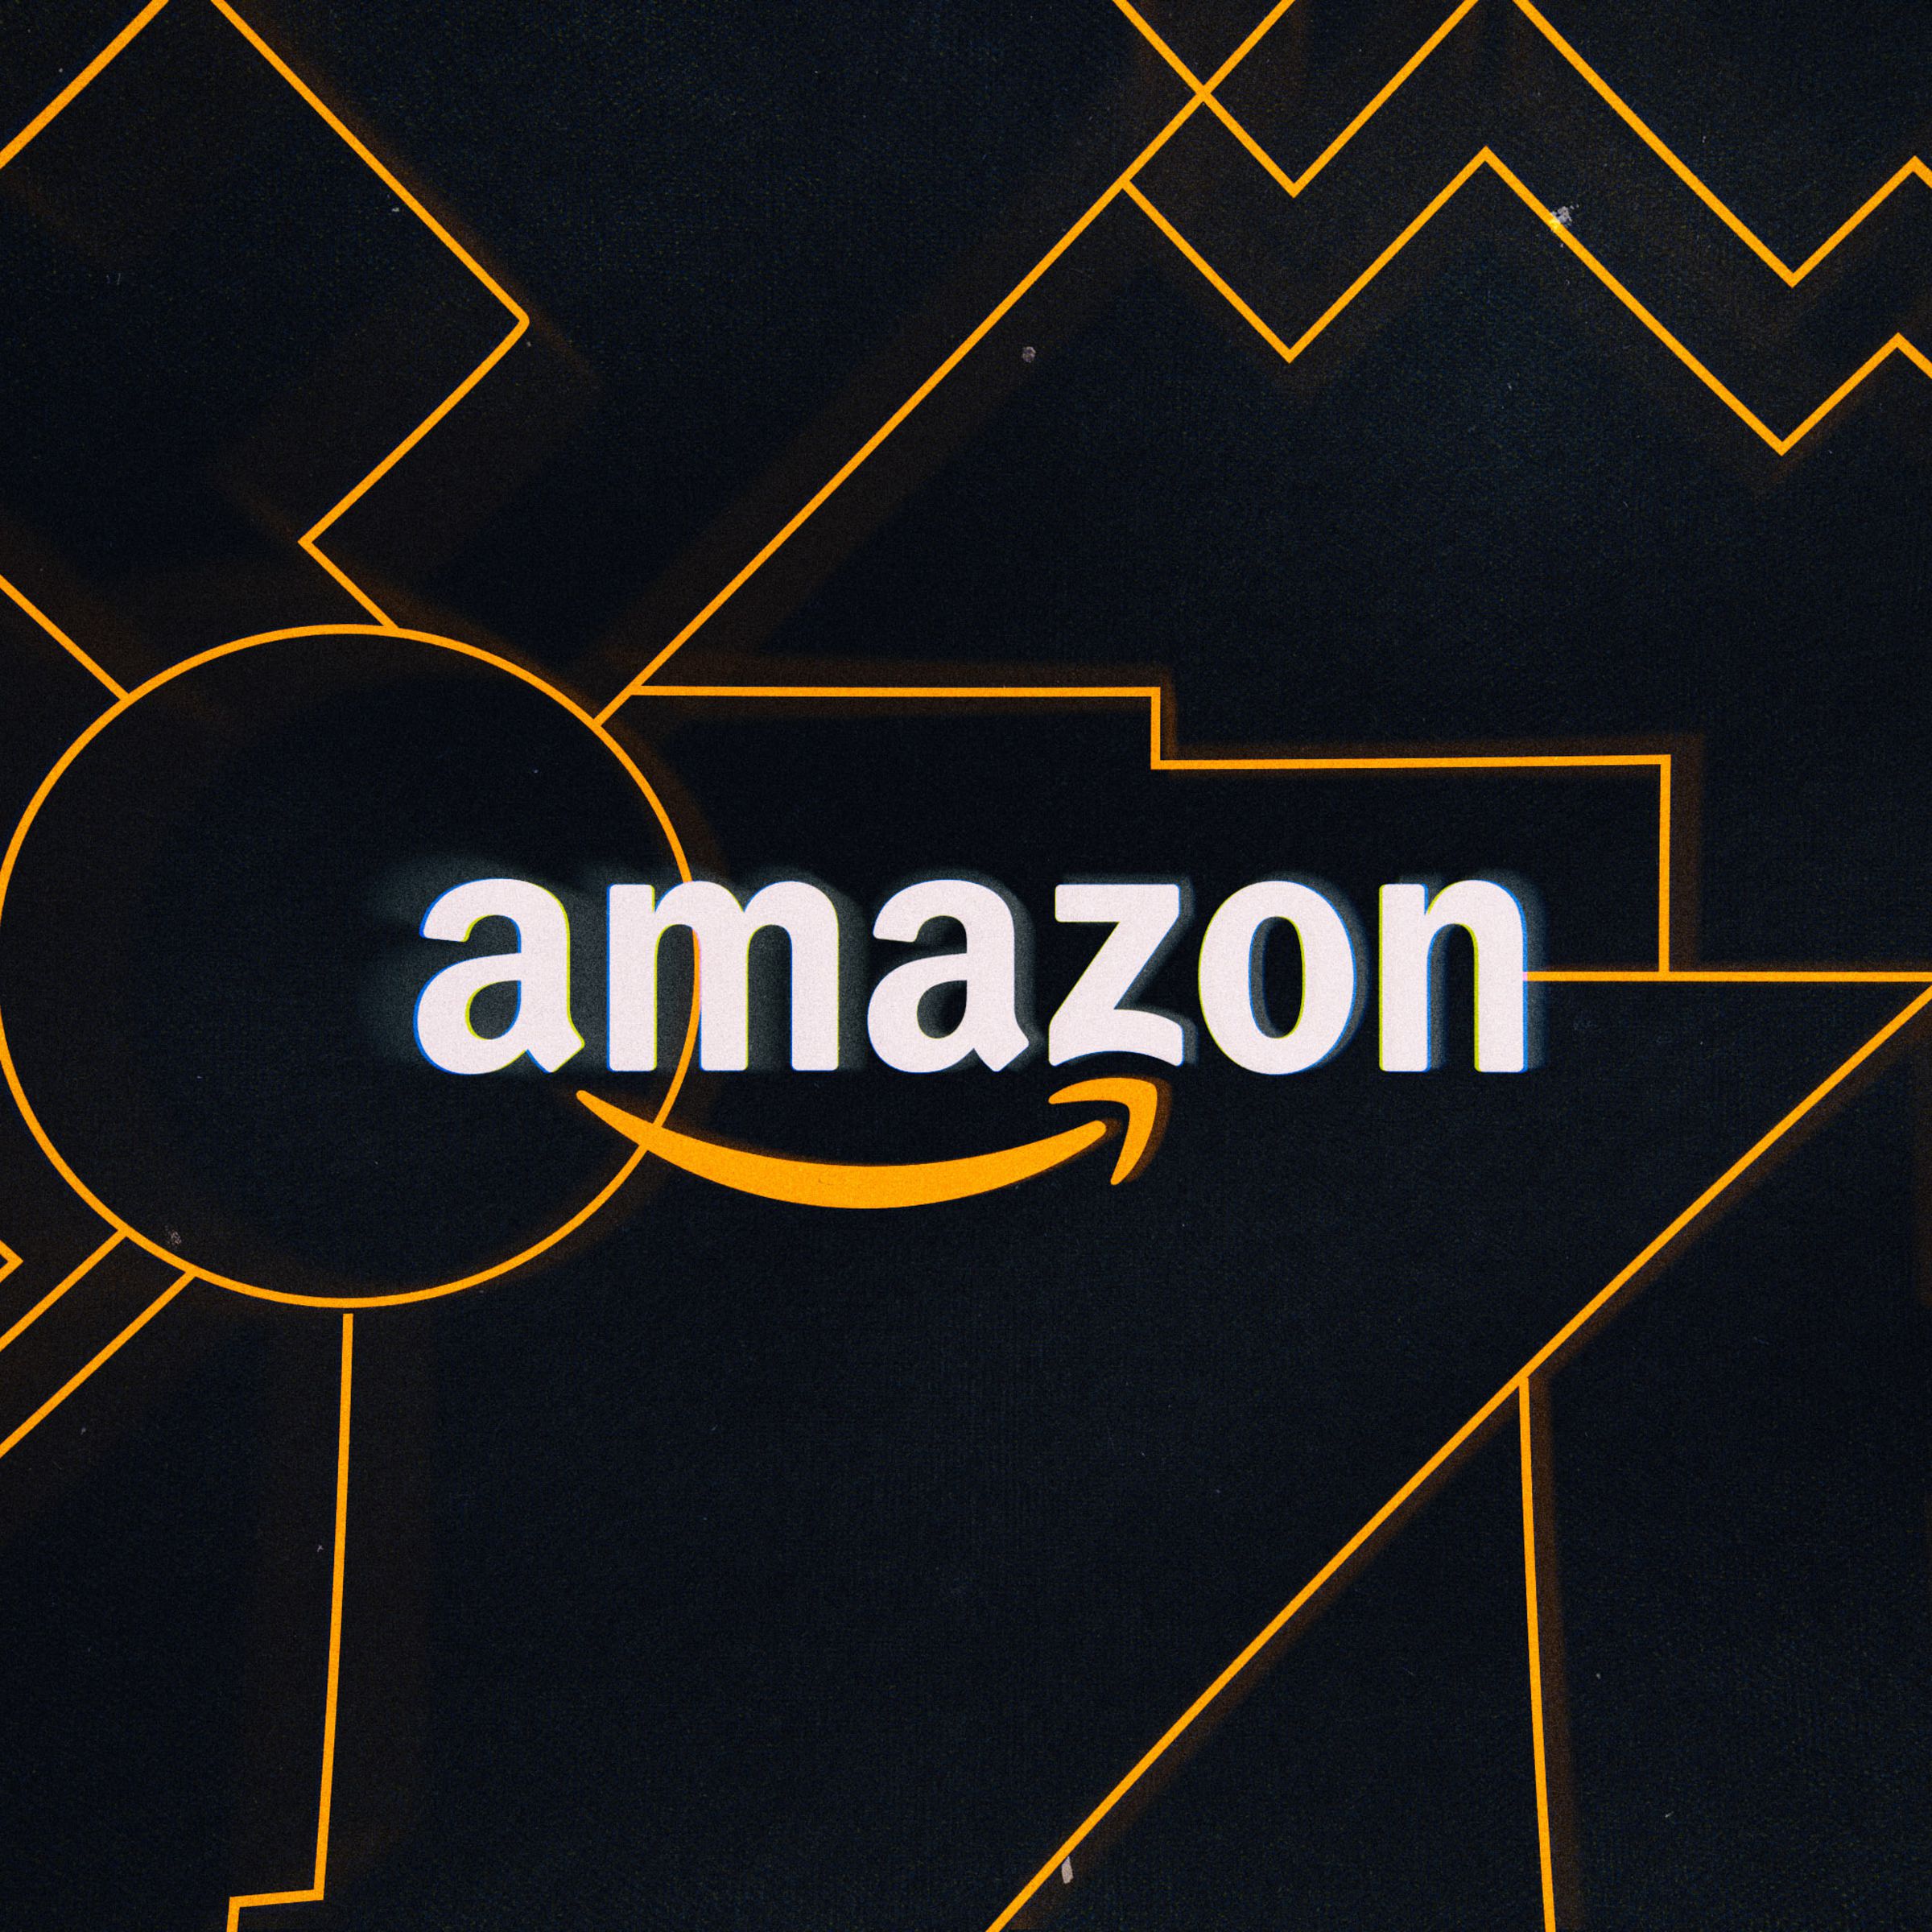 The Amazon logo against a yellow and black background